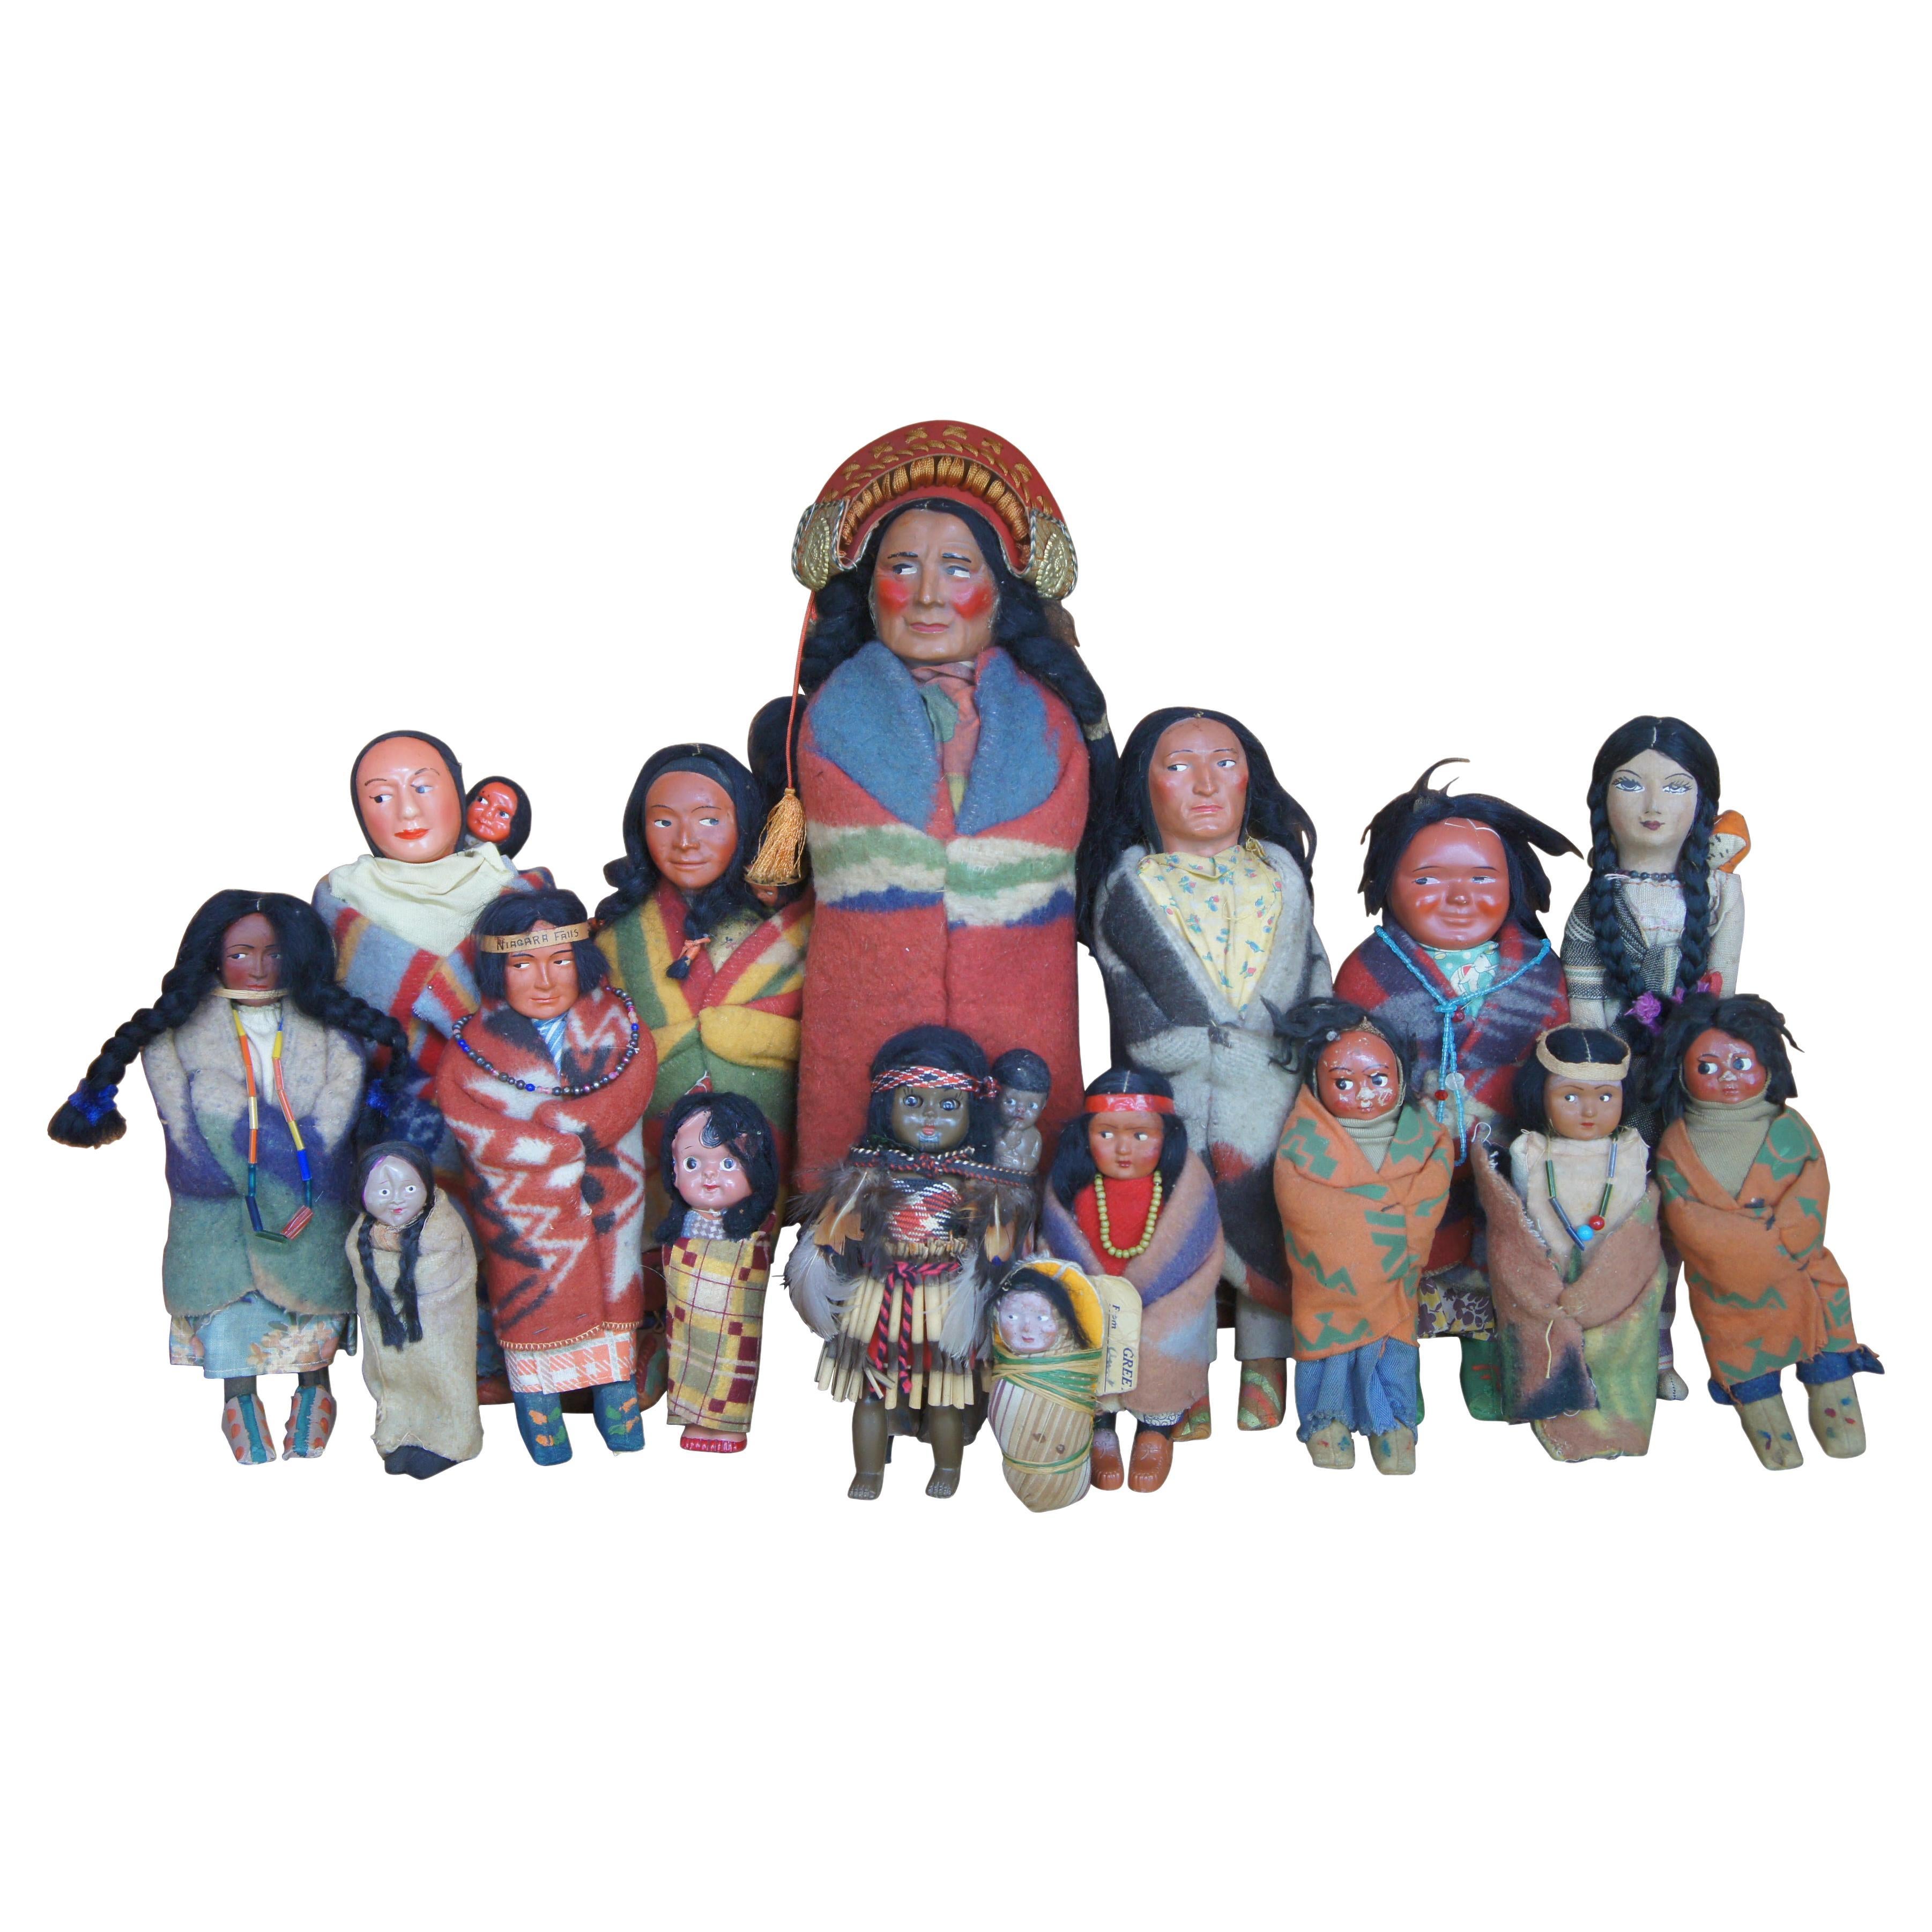 16 antike Native American Skookum Bully Good Indian Dolls Papoose Tribal aus Wolle 